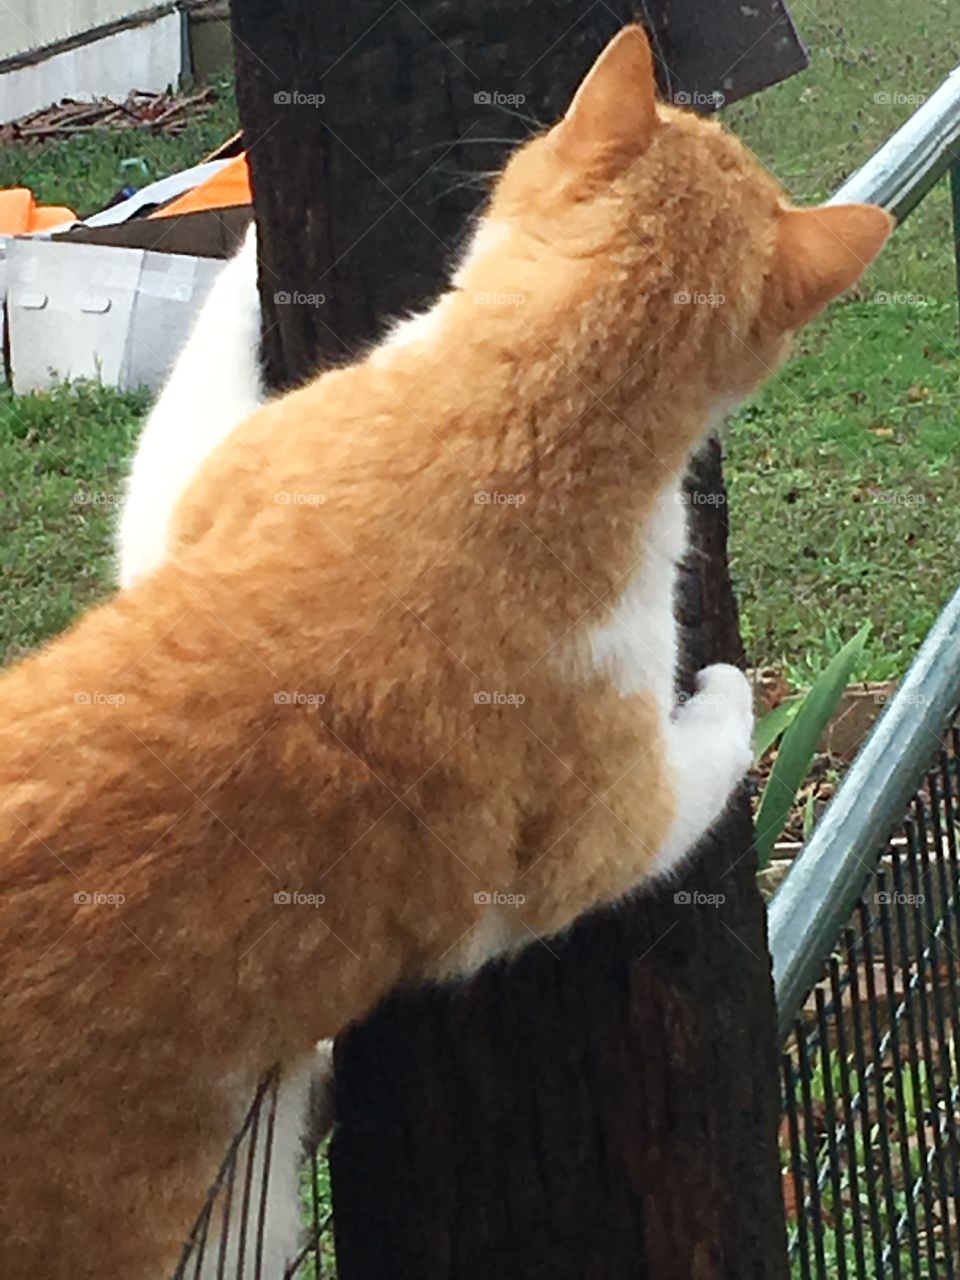 Tom climbing the post to get over the fence to get into the back yard. Silly cat!